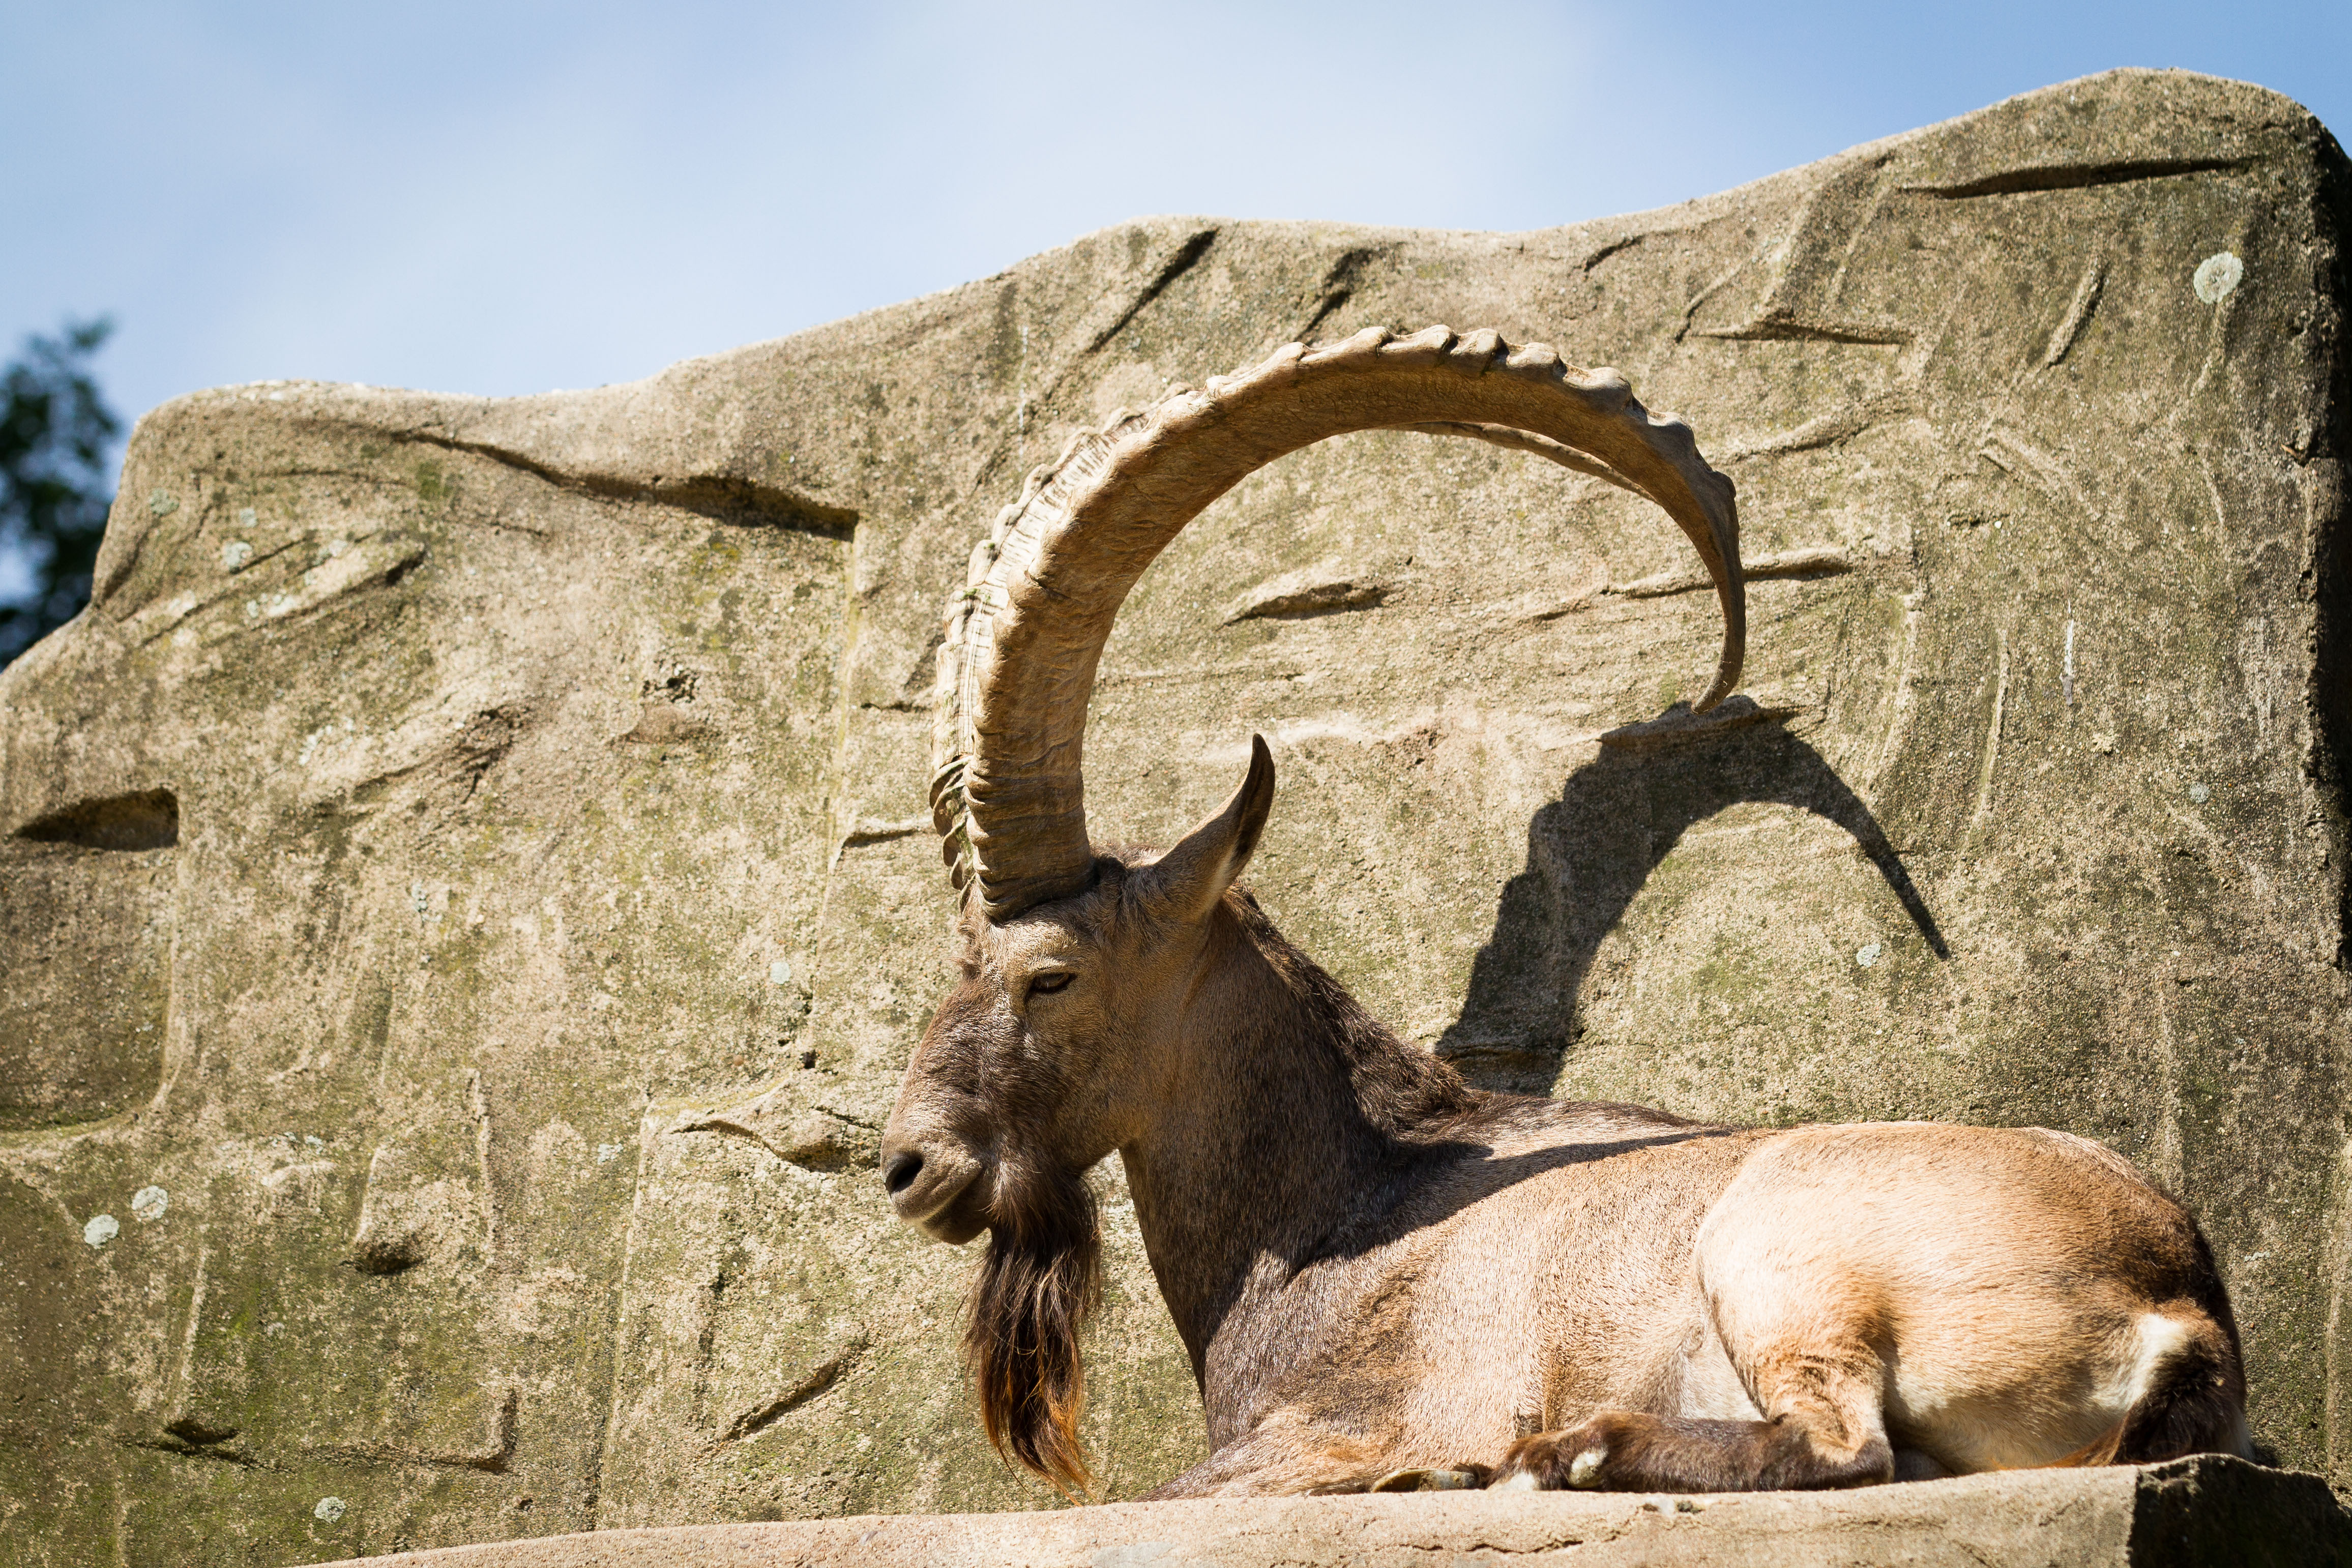 Animal Alpine Ibex 4k Ultra HD Wallpaper by Cloudtail the Snow Leopard